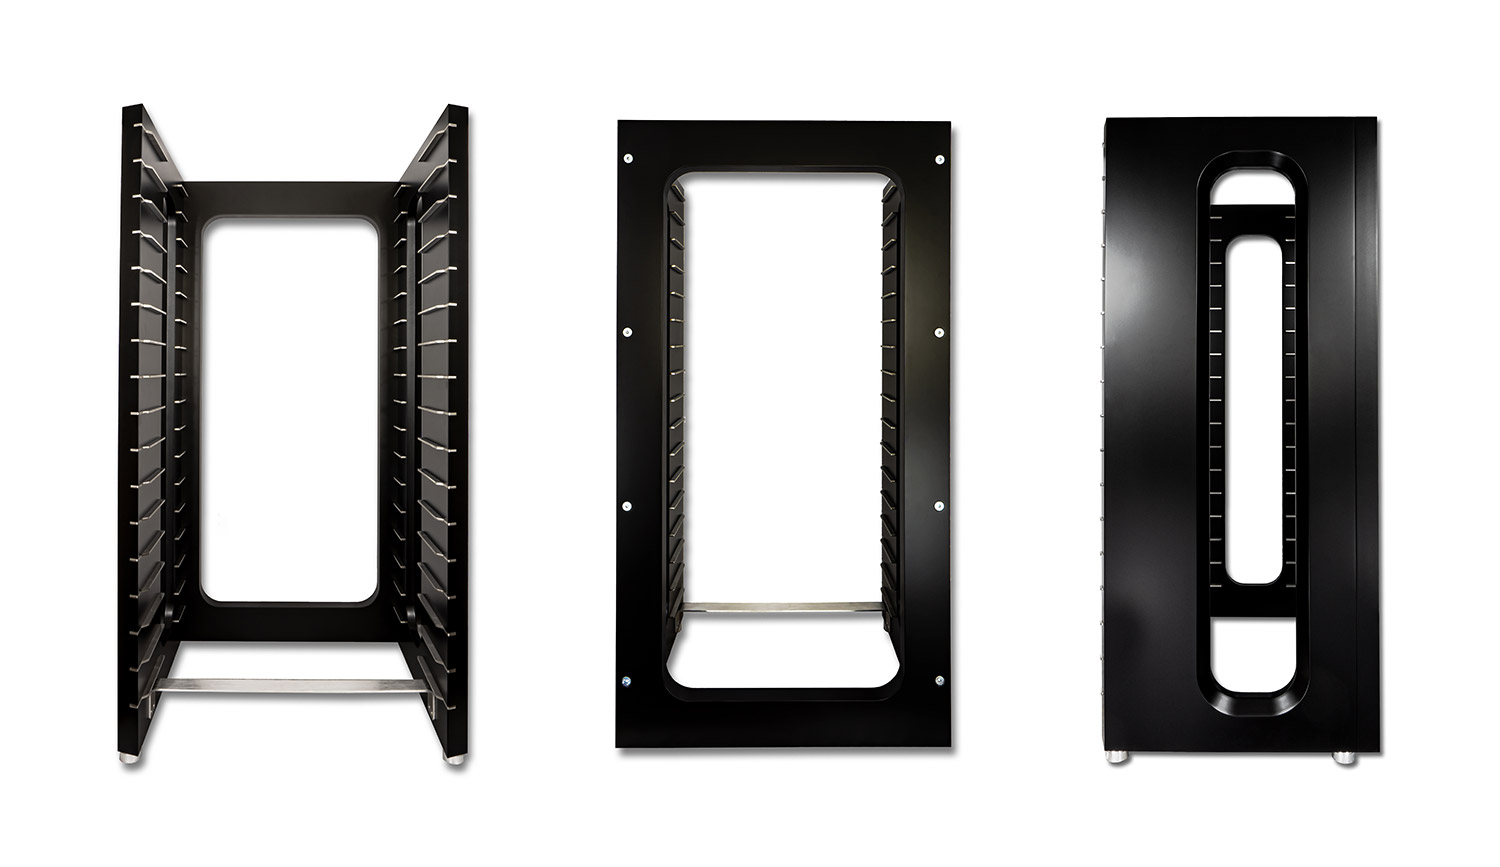 Frame of the THIXAR HiFi racks Serenity Plus in black matt and size L (front, back, side).